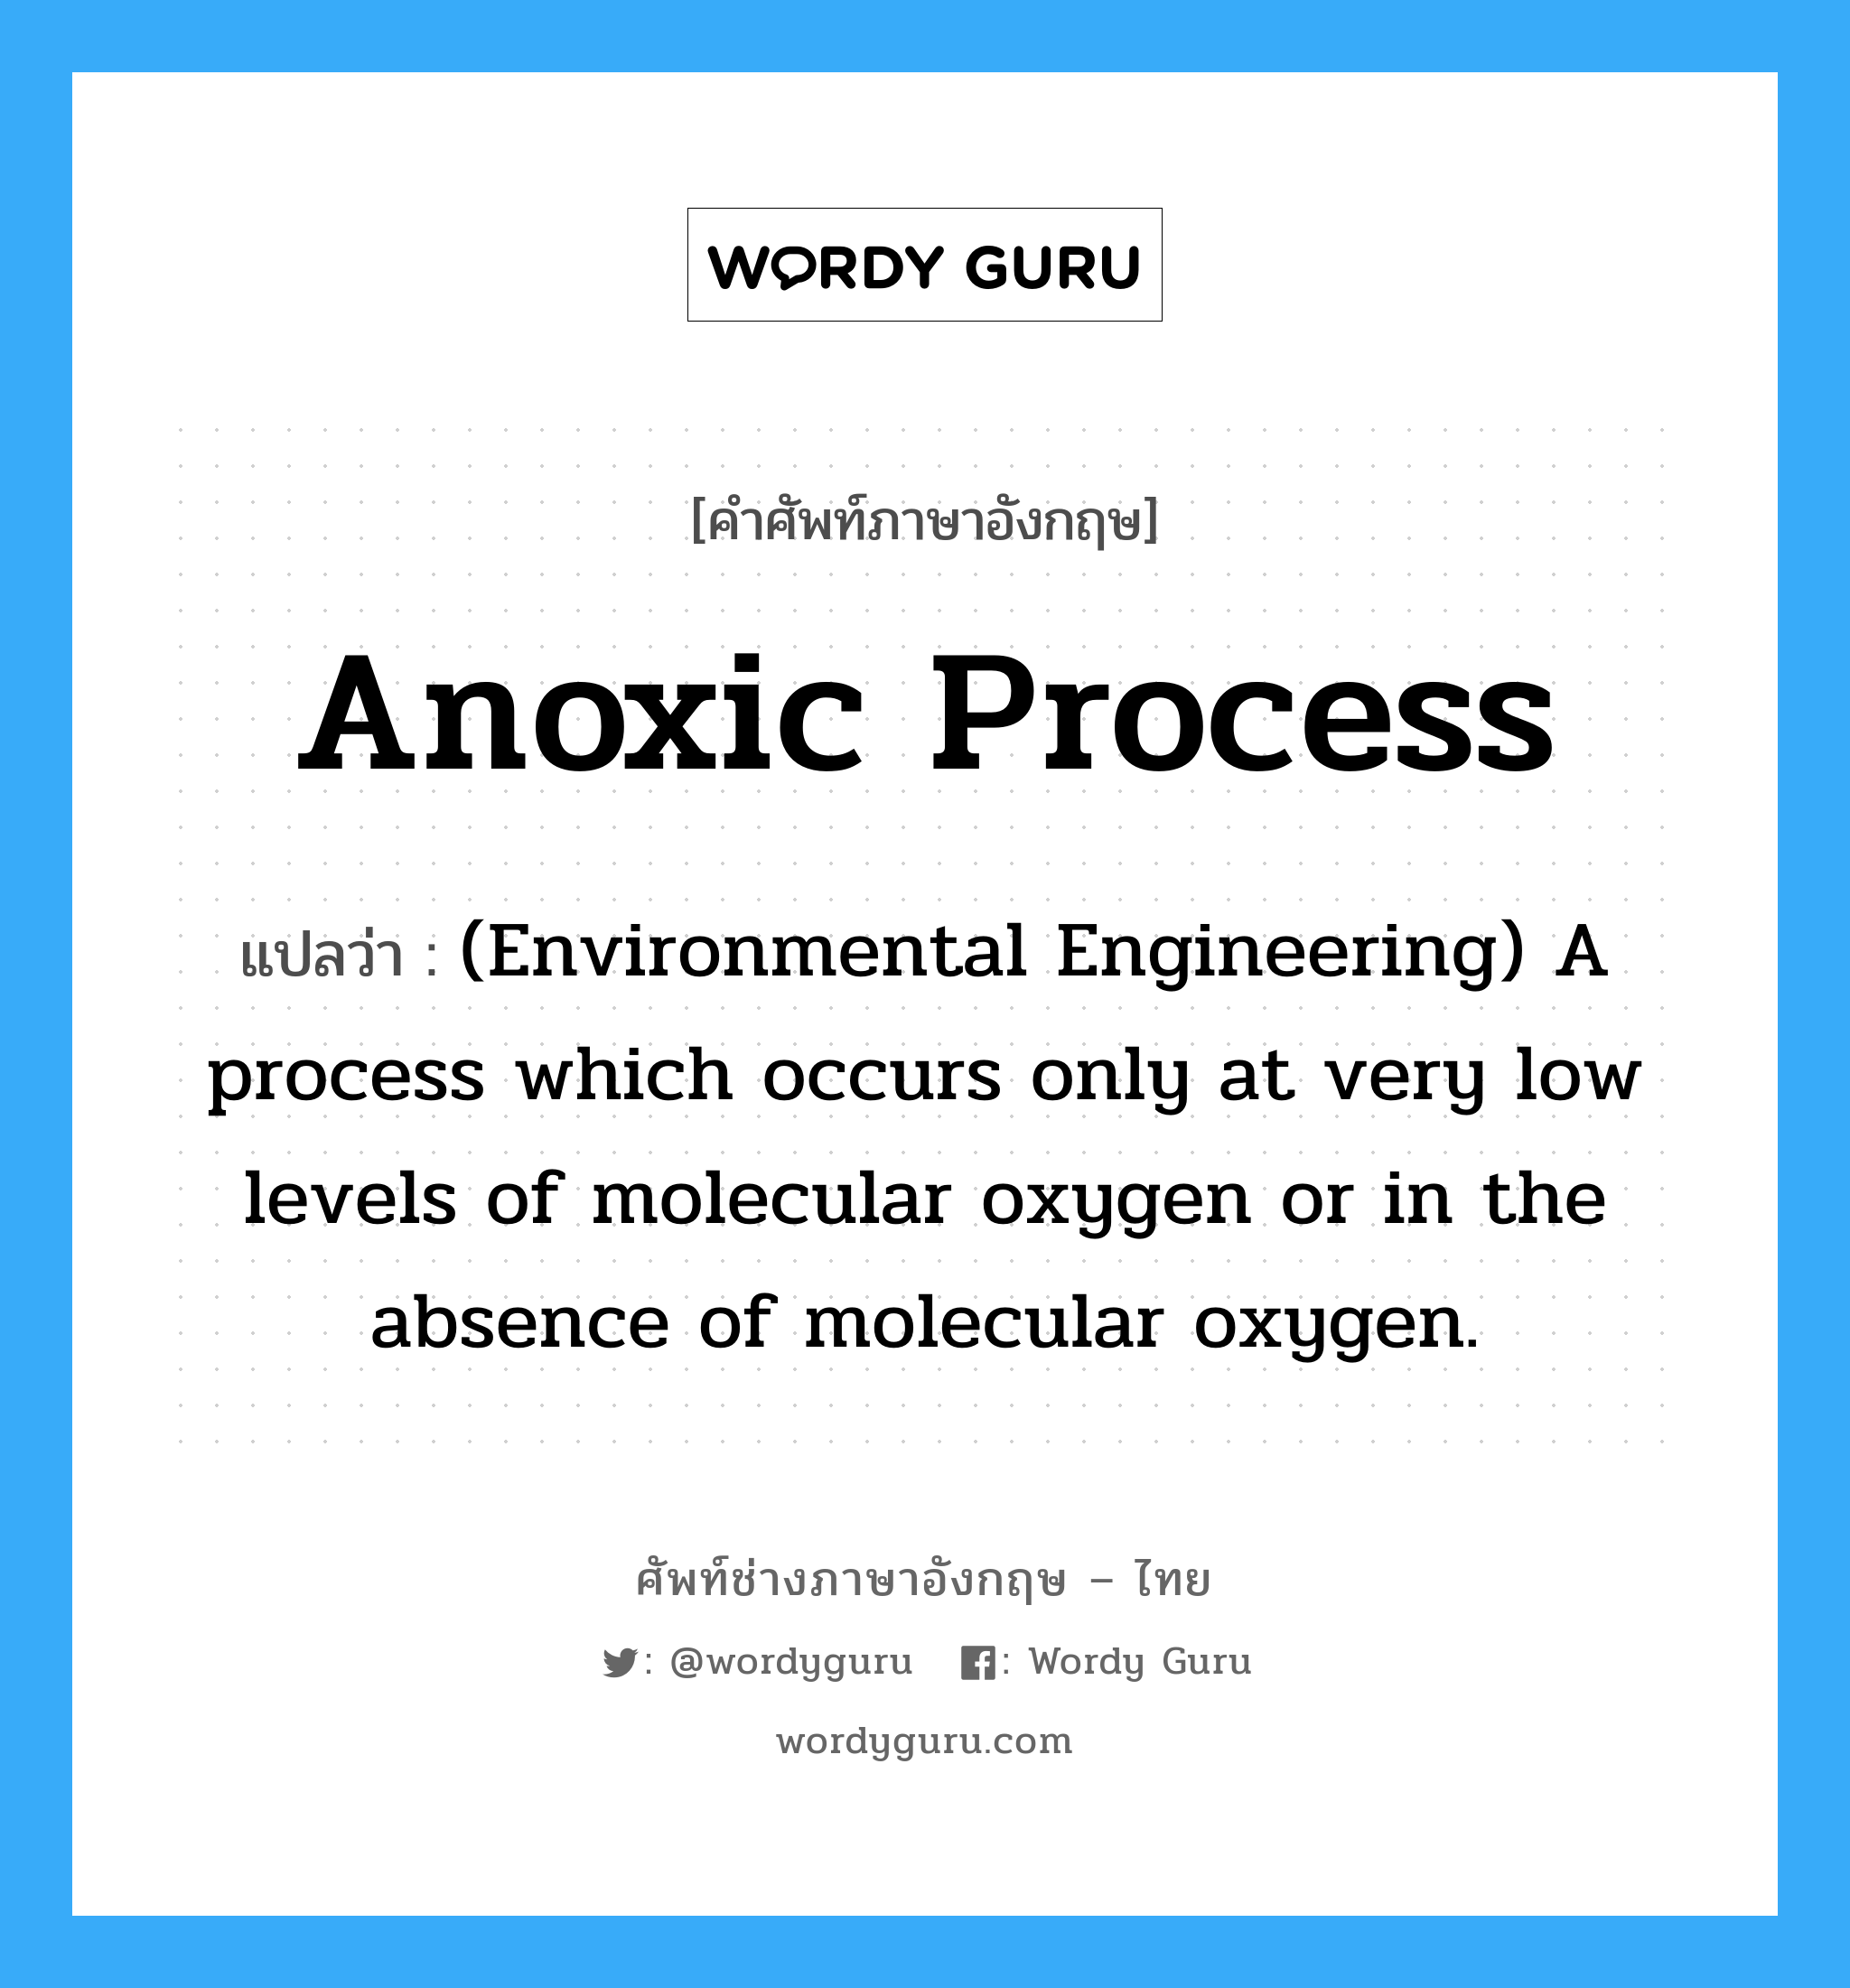 (Environmental Engineering) A process which occurs only at very low levels of molecular oxygen or in the absence of molecular oxygen. ภาษาอังกฤษ?, คำศัพท์ช่างภาษาอังกฤษ - ไทย (Environmental Engineering) A process which occurs only at very low levels of molecular oxygen or in the absence of molecular oxygen. คำศัพท์ภาษาอังกฤษ (Environmental Engineering) A process which occurs only at very low levels of molecular oxygen or in the absence of molecular oxygen. แปลว่า Anoxic process